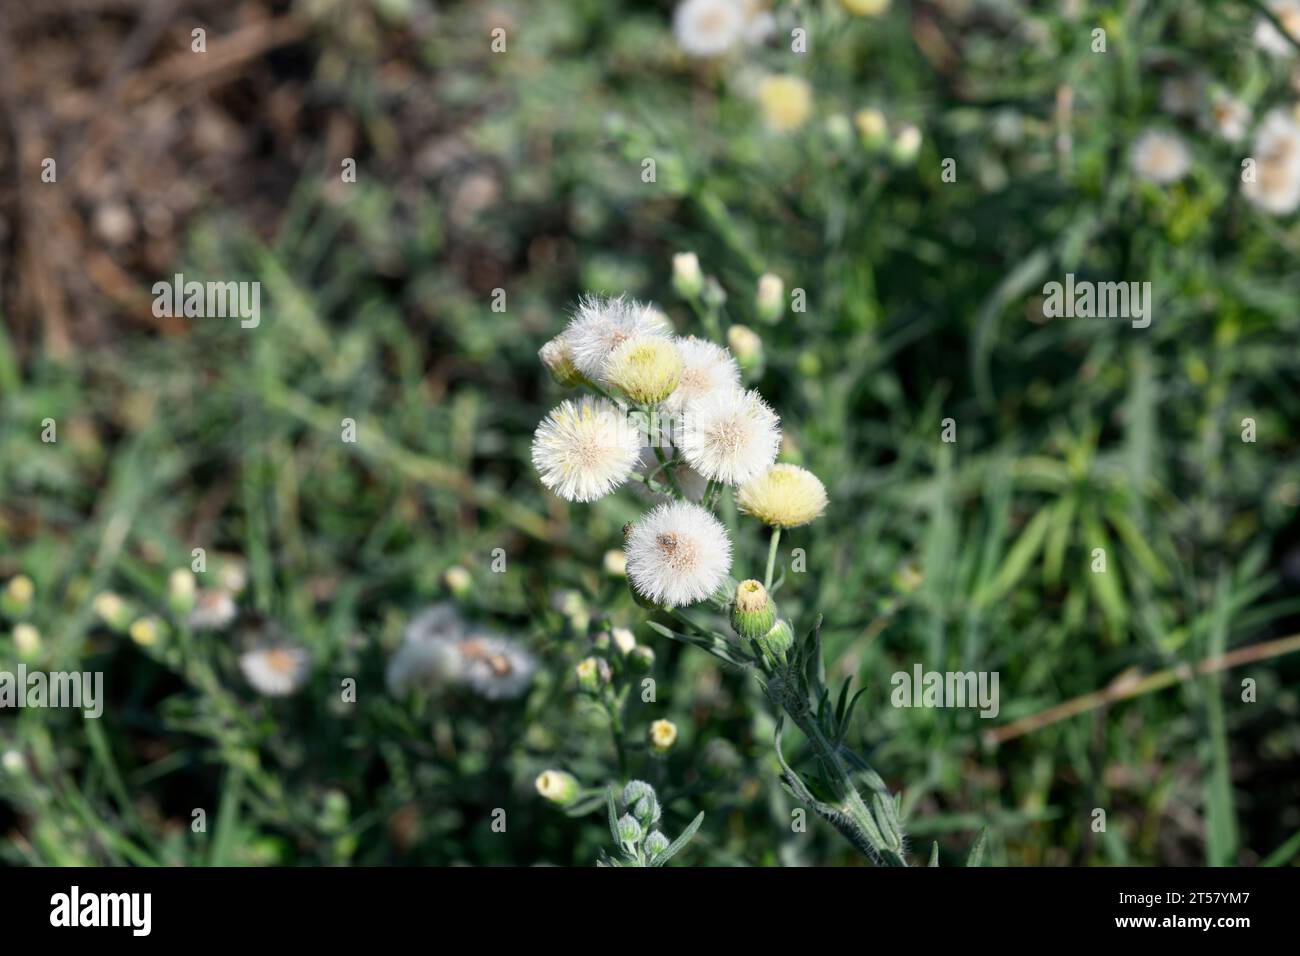 Argentine fleabane or hairy fleabane (Conyza bonariensis or Erigeron bonariensis) is a small shrub probably native to Central or South America and nat Stock Photo